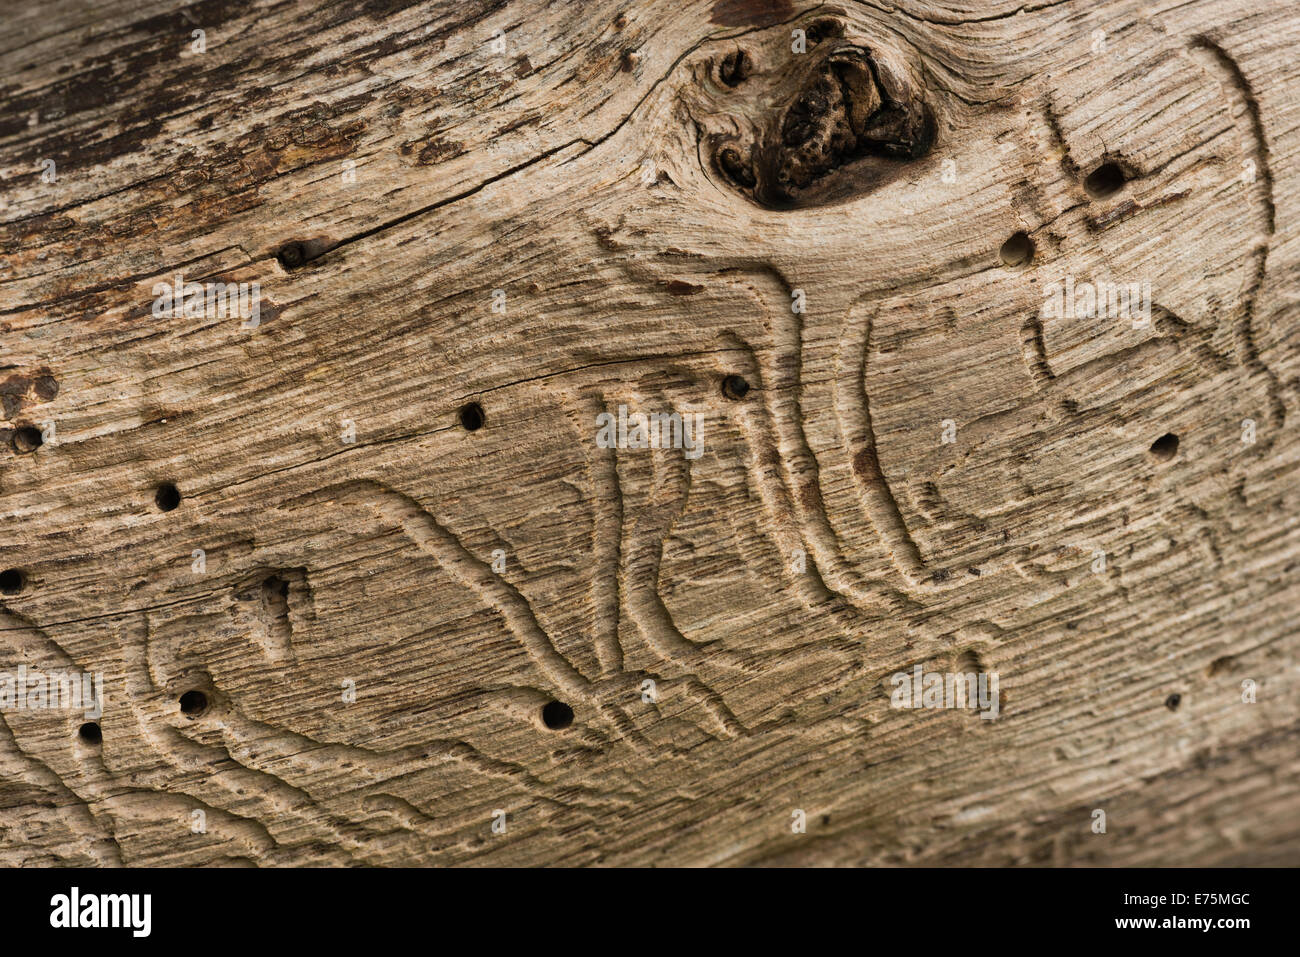 patterns in oak tree made by wood burring insect larvae, woodworm showing branching tunnels and passages once bark has fall away Stock Photo